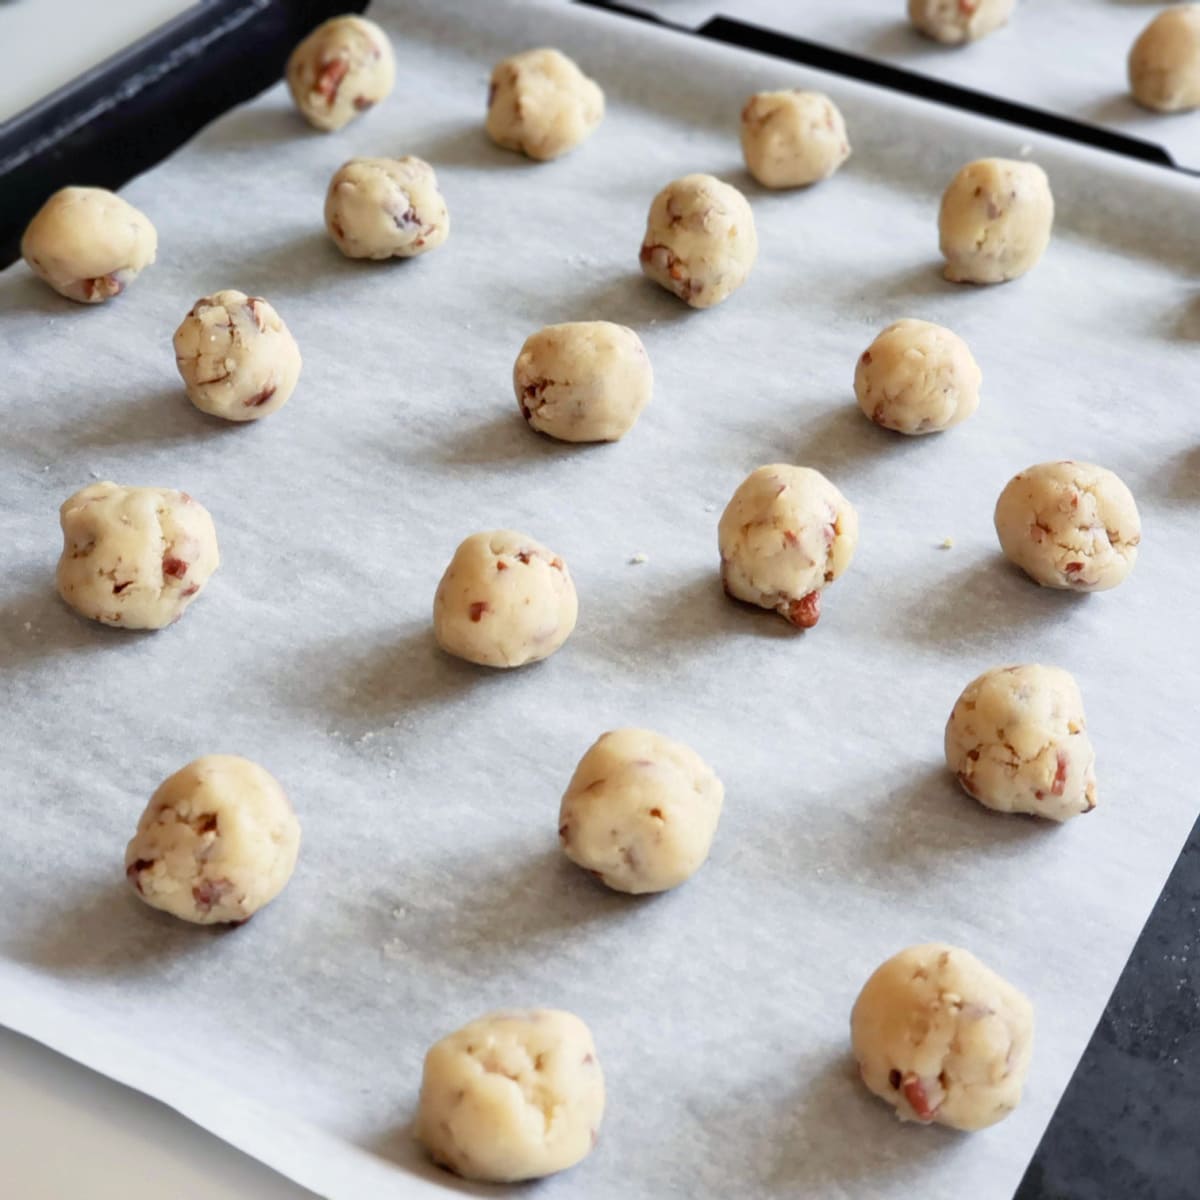 20 dough balls for Mexican Wedding Cookies on a parchment-lined baking sheet